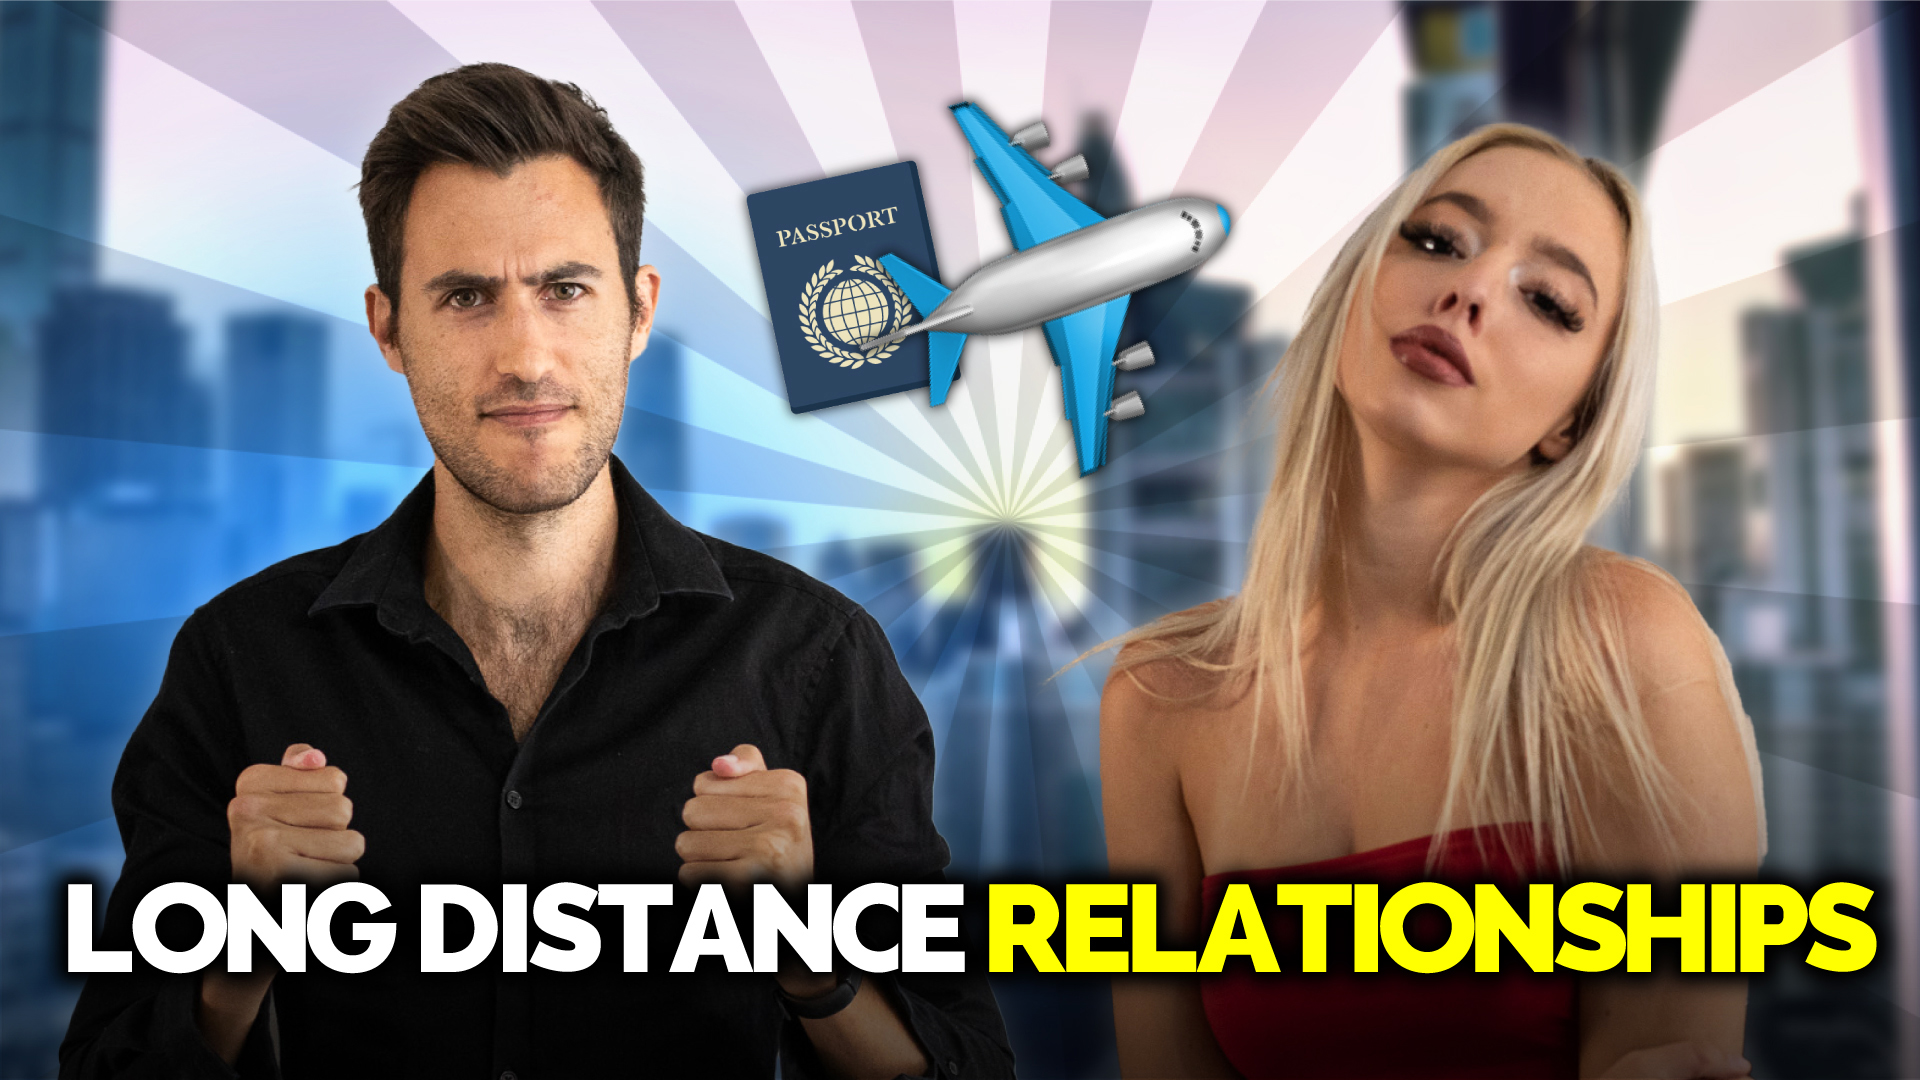 How To Make Long Distance Relationships Work (SIMPLE HACKS)